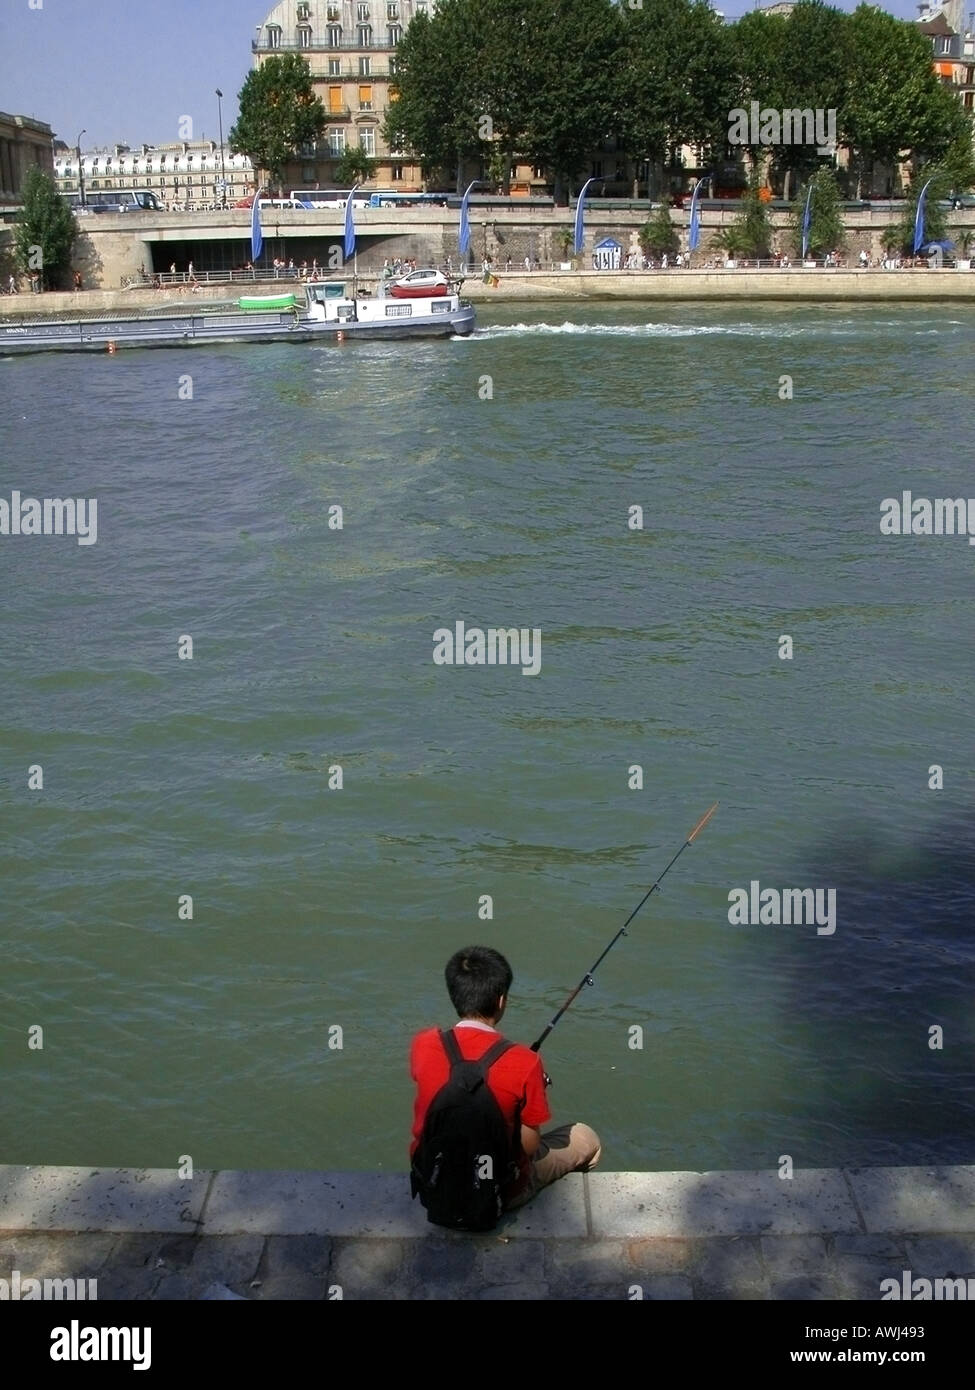 https://c8.alamy.com/comp/AWJ493/france-paris-boy-fishing-fin-the-seine-river-from-quayside-of-le-vert-AWJ493.jpg